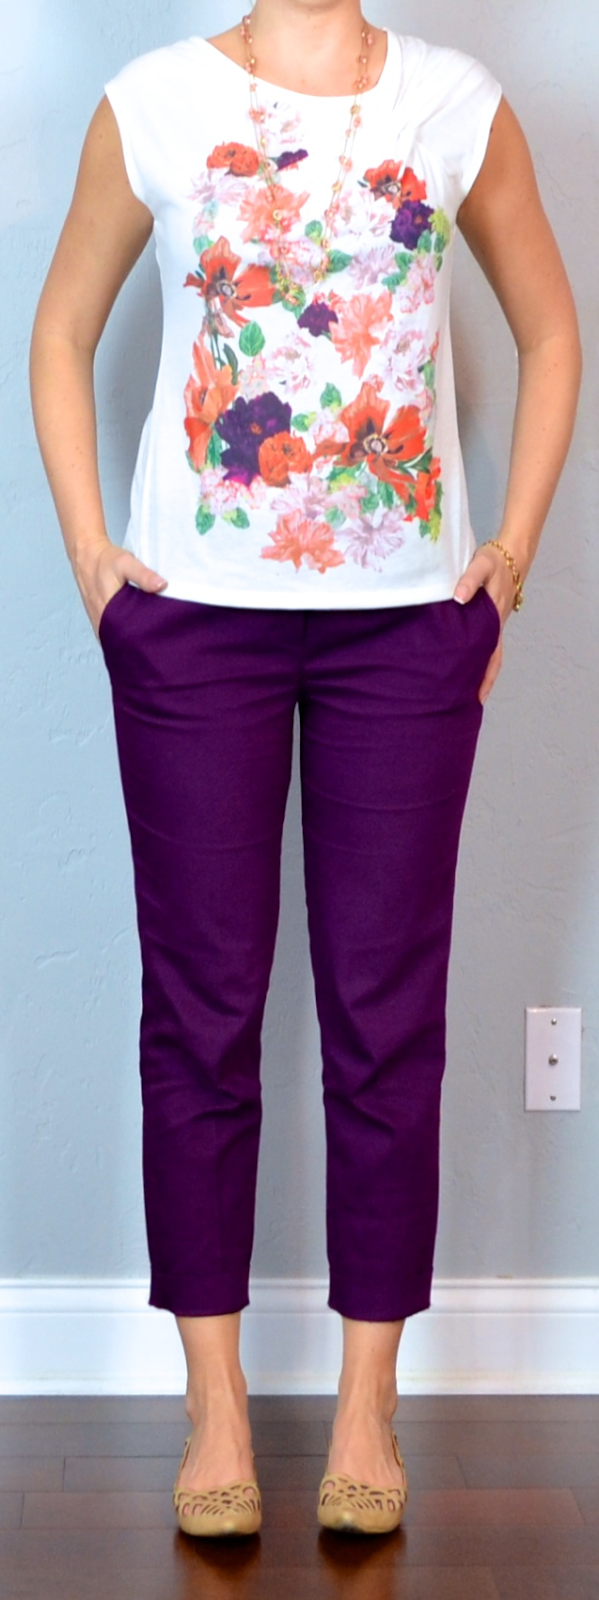 outfit post: floral top, purple cropped pants, cutout flats